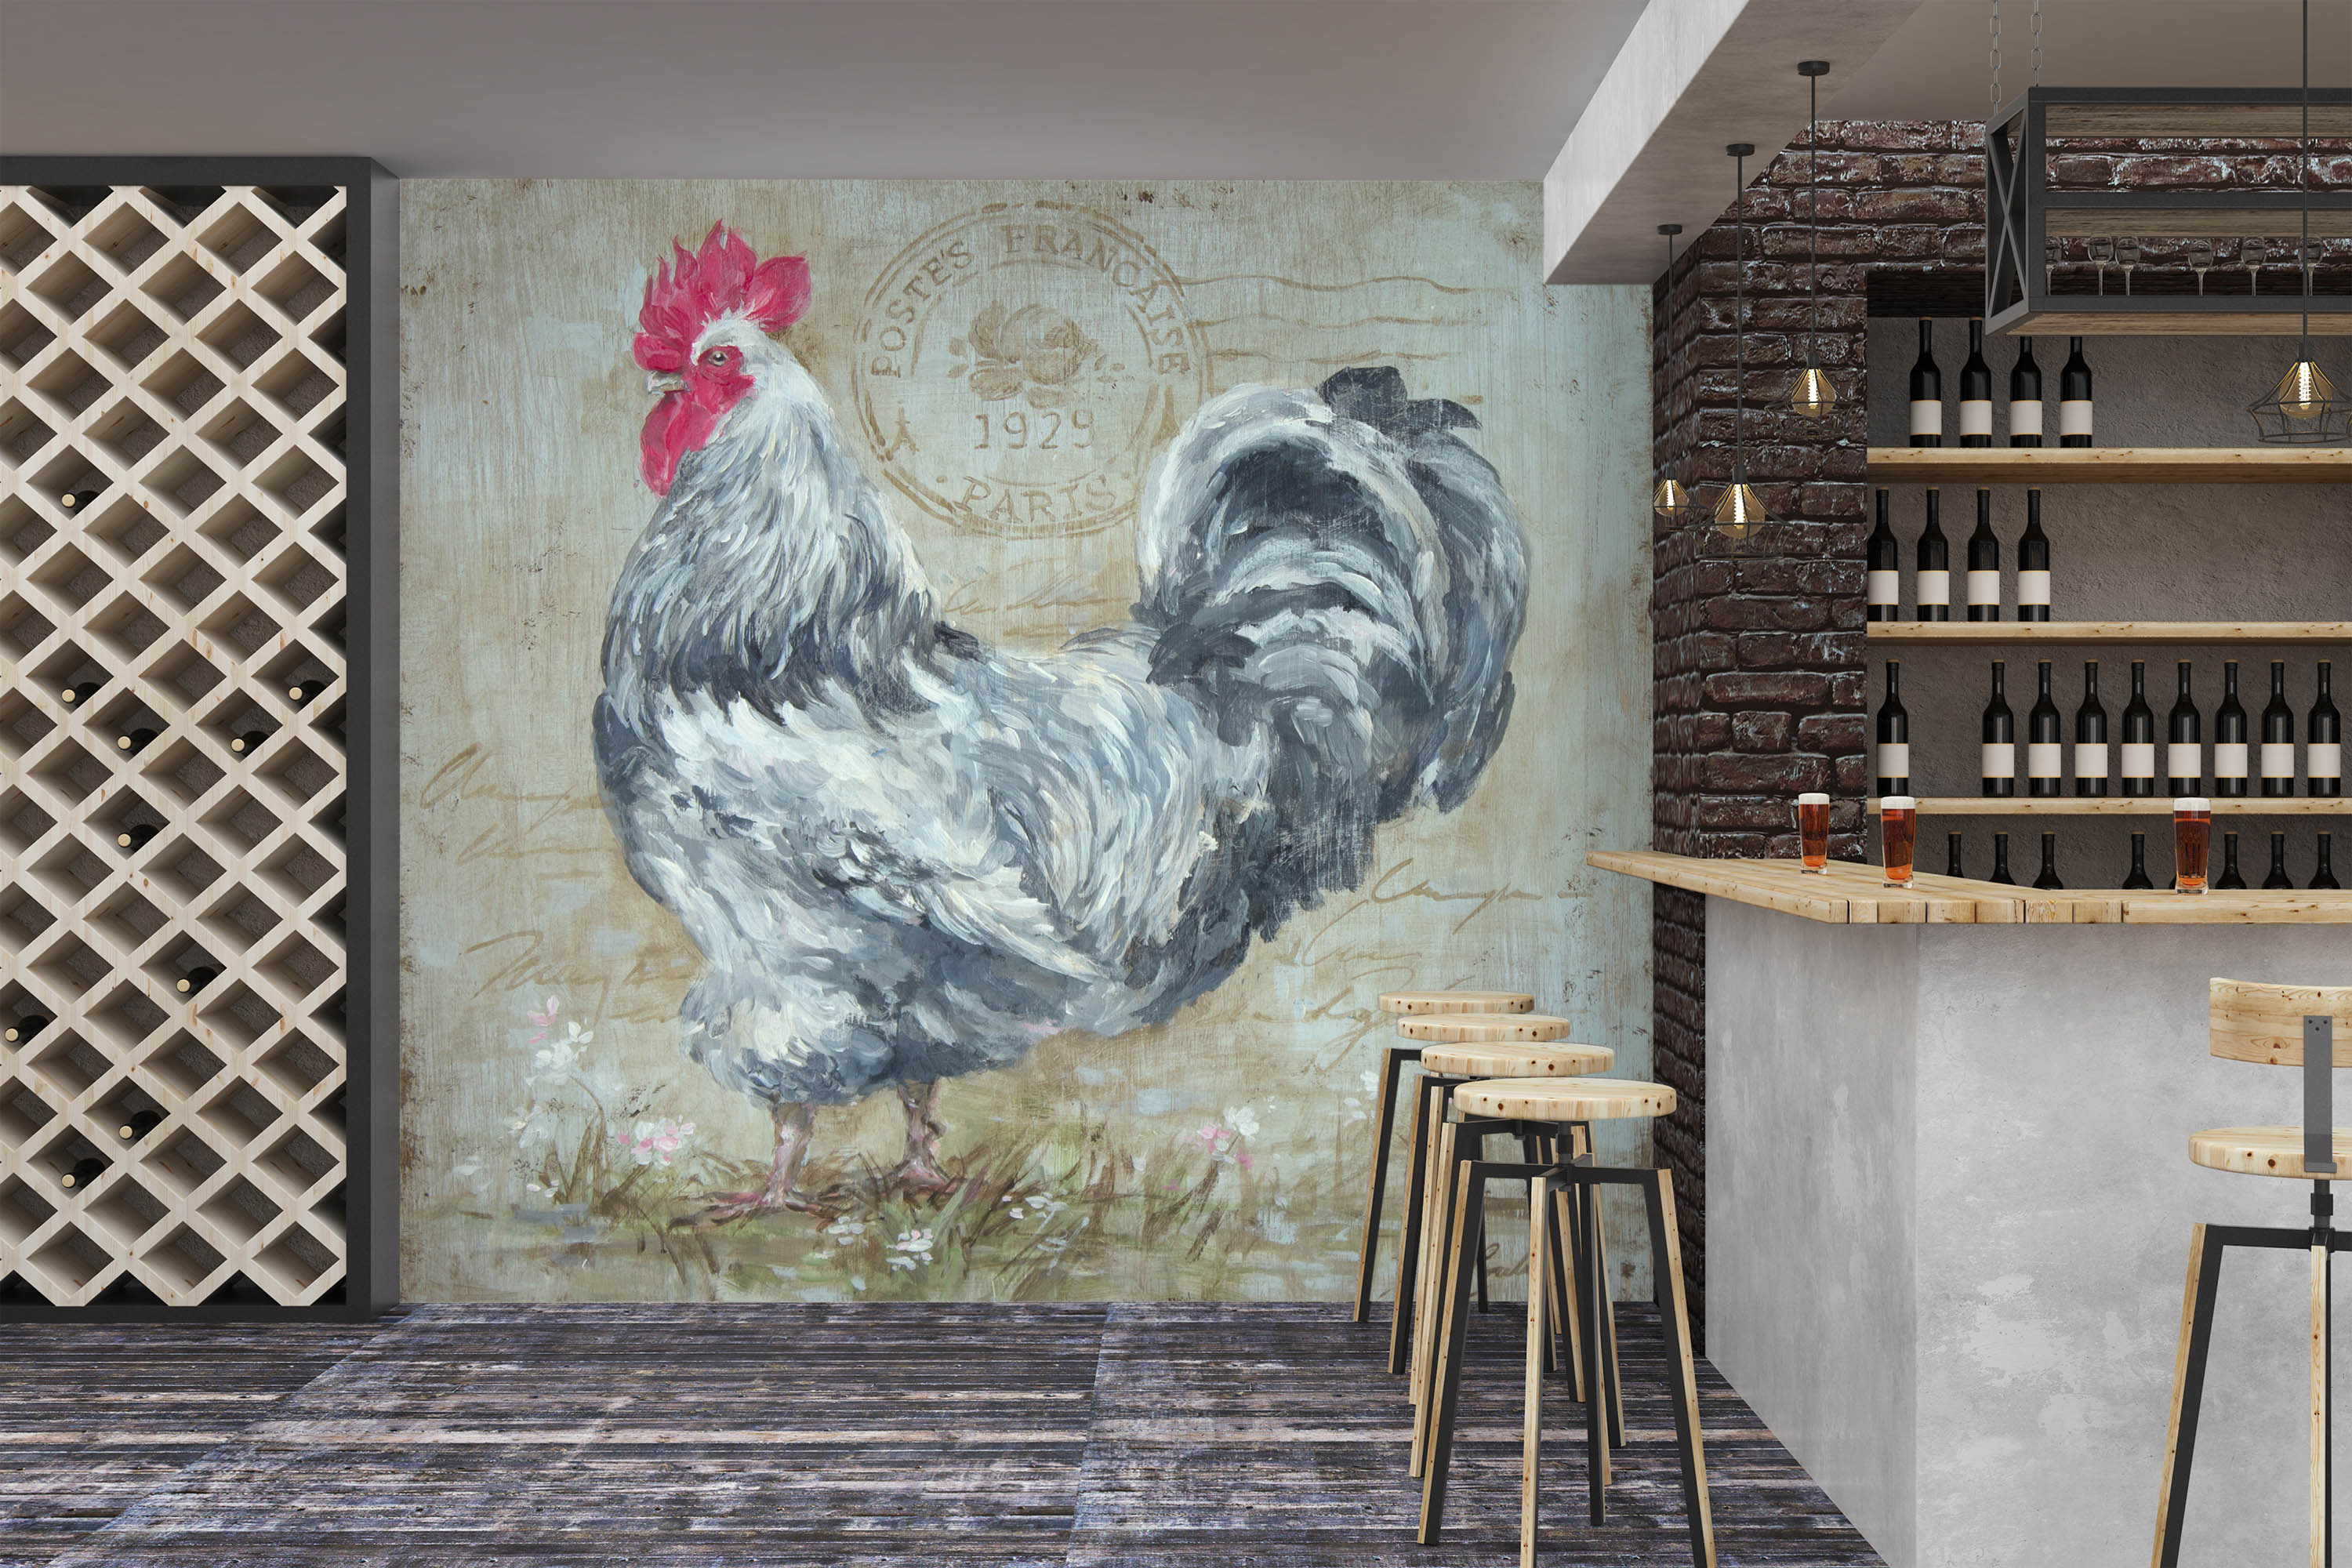 3D Rooster 3112 Debi Coules Wall Mural Wall Murals